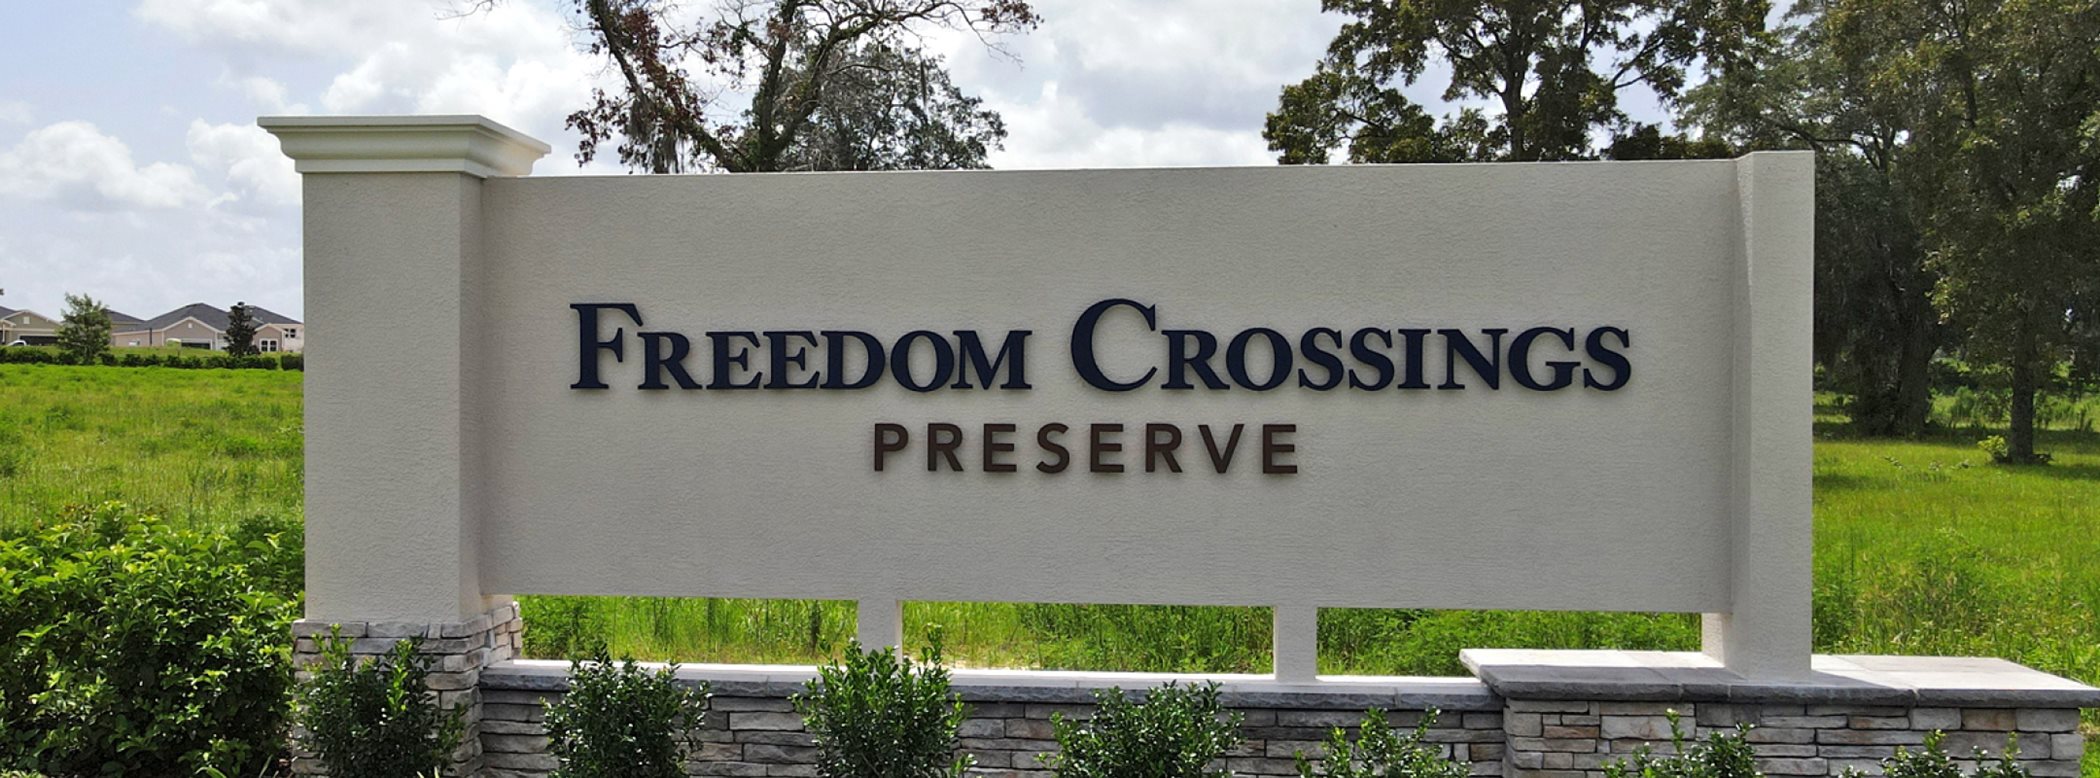 Freedom Crossings Entry Monument